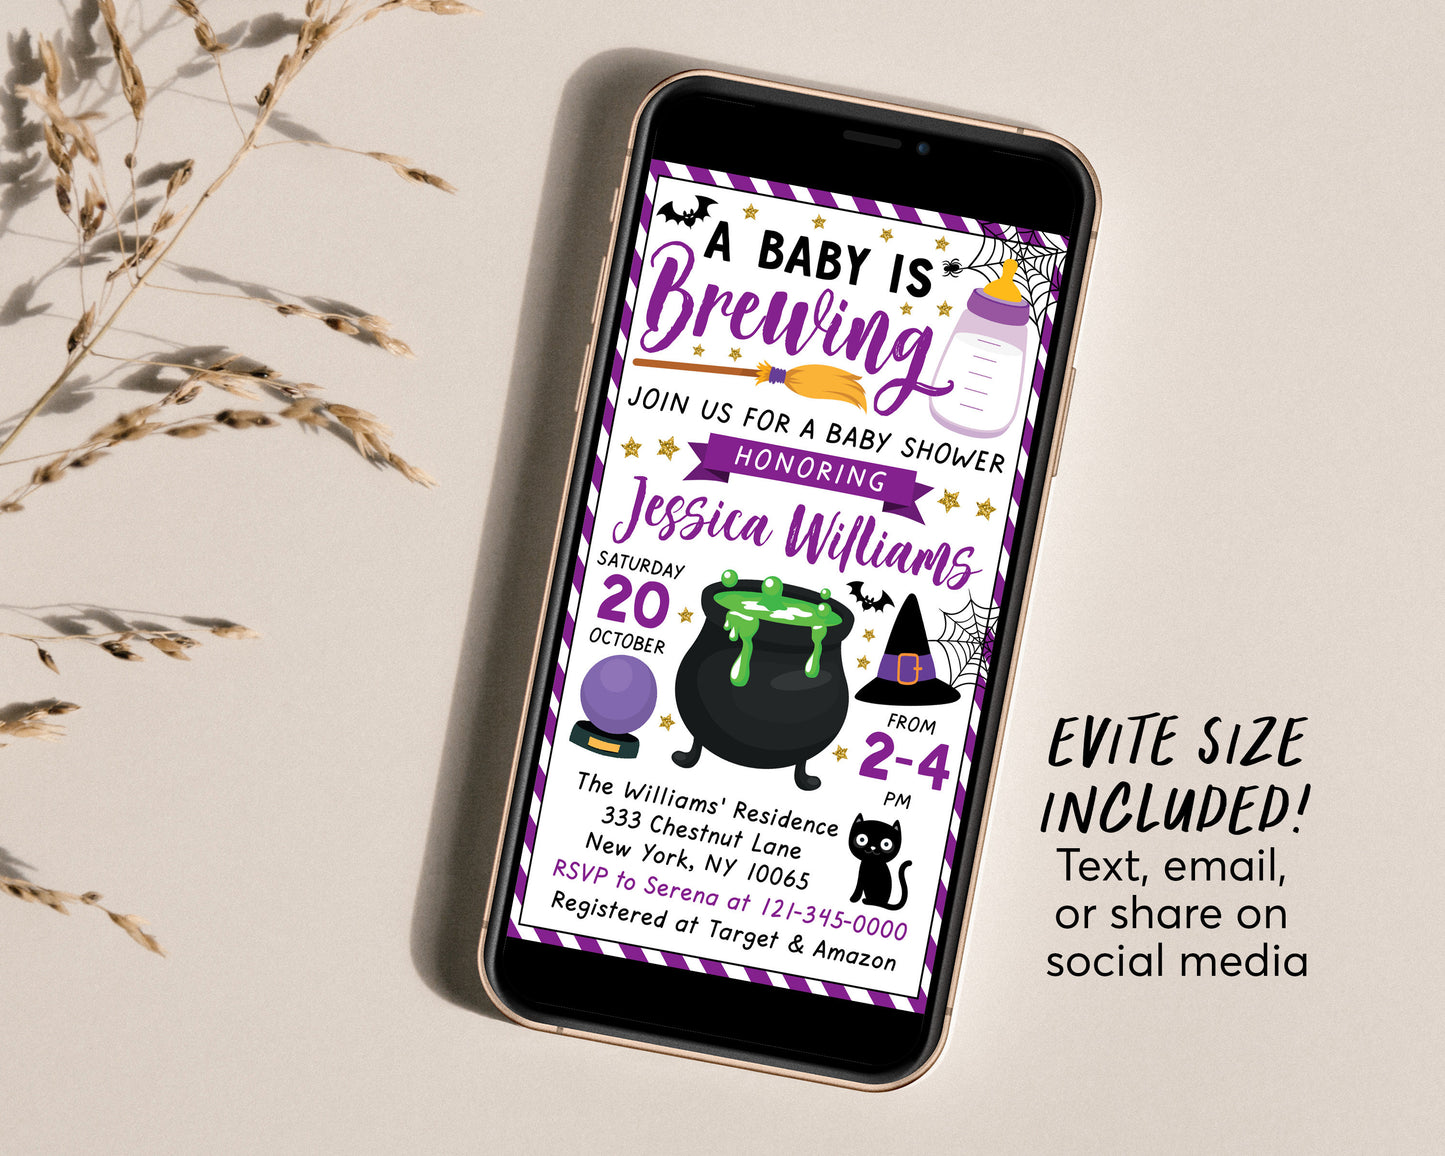 A Baby is Brewing Baby Shower Invitation Editable Template, Purple Witch Themed Gender Neutral Girl Halloween Baby Sprinkle Invite Evite DIY